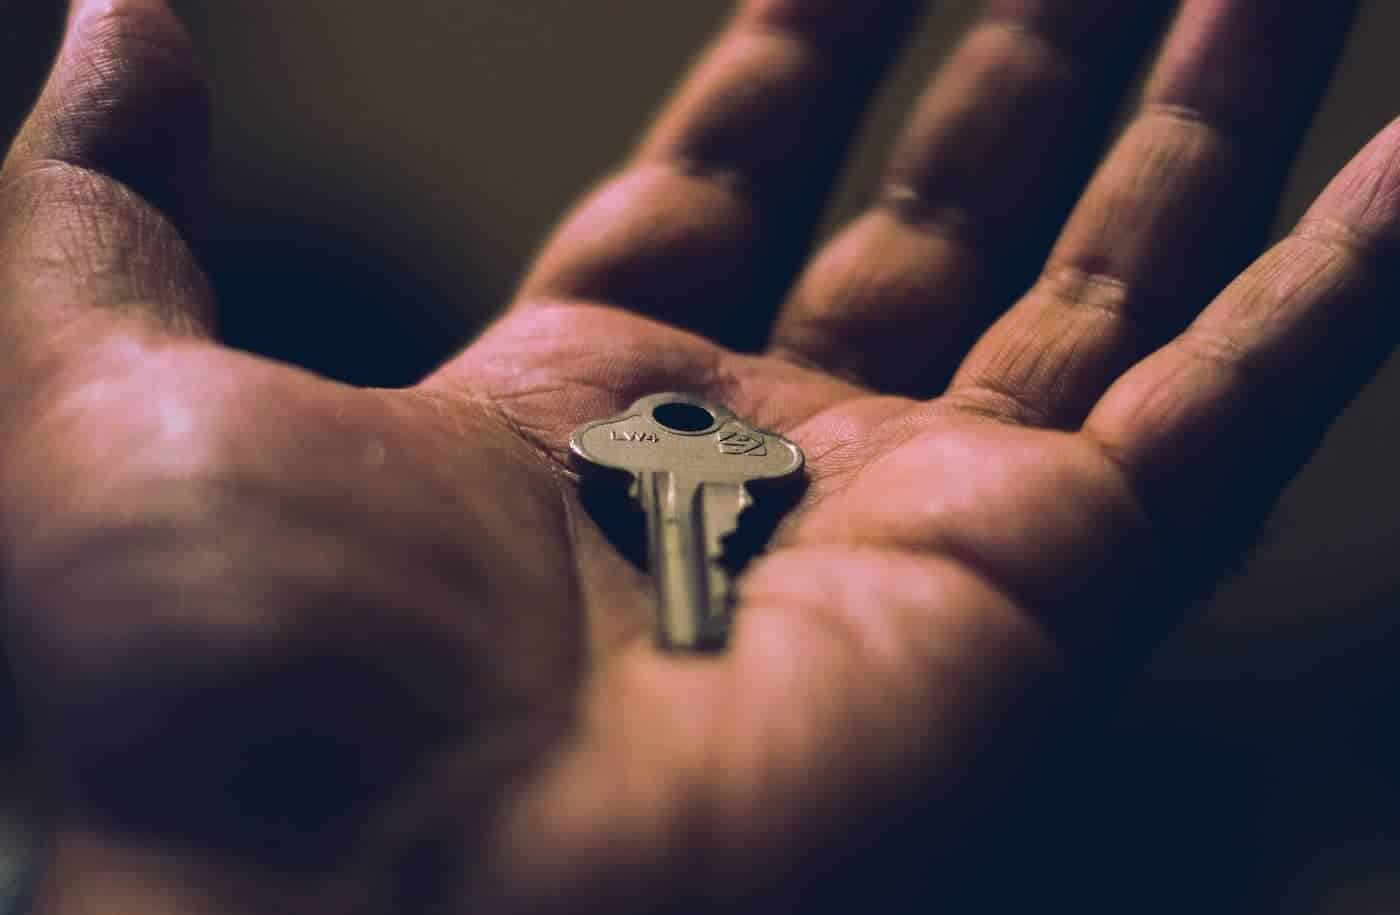 Man Holding a Key in His Hand